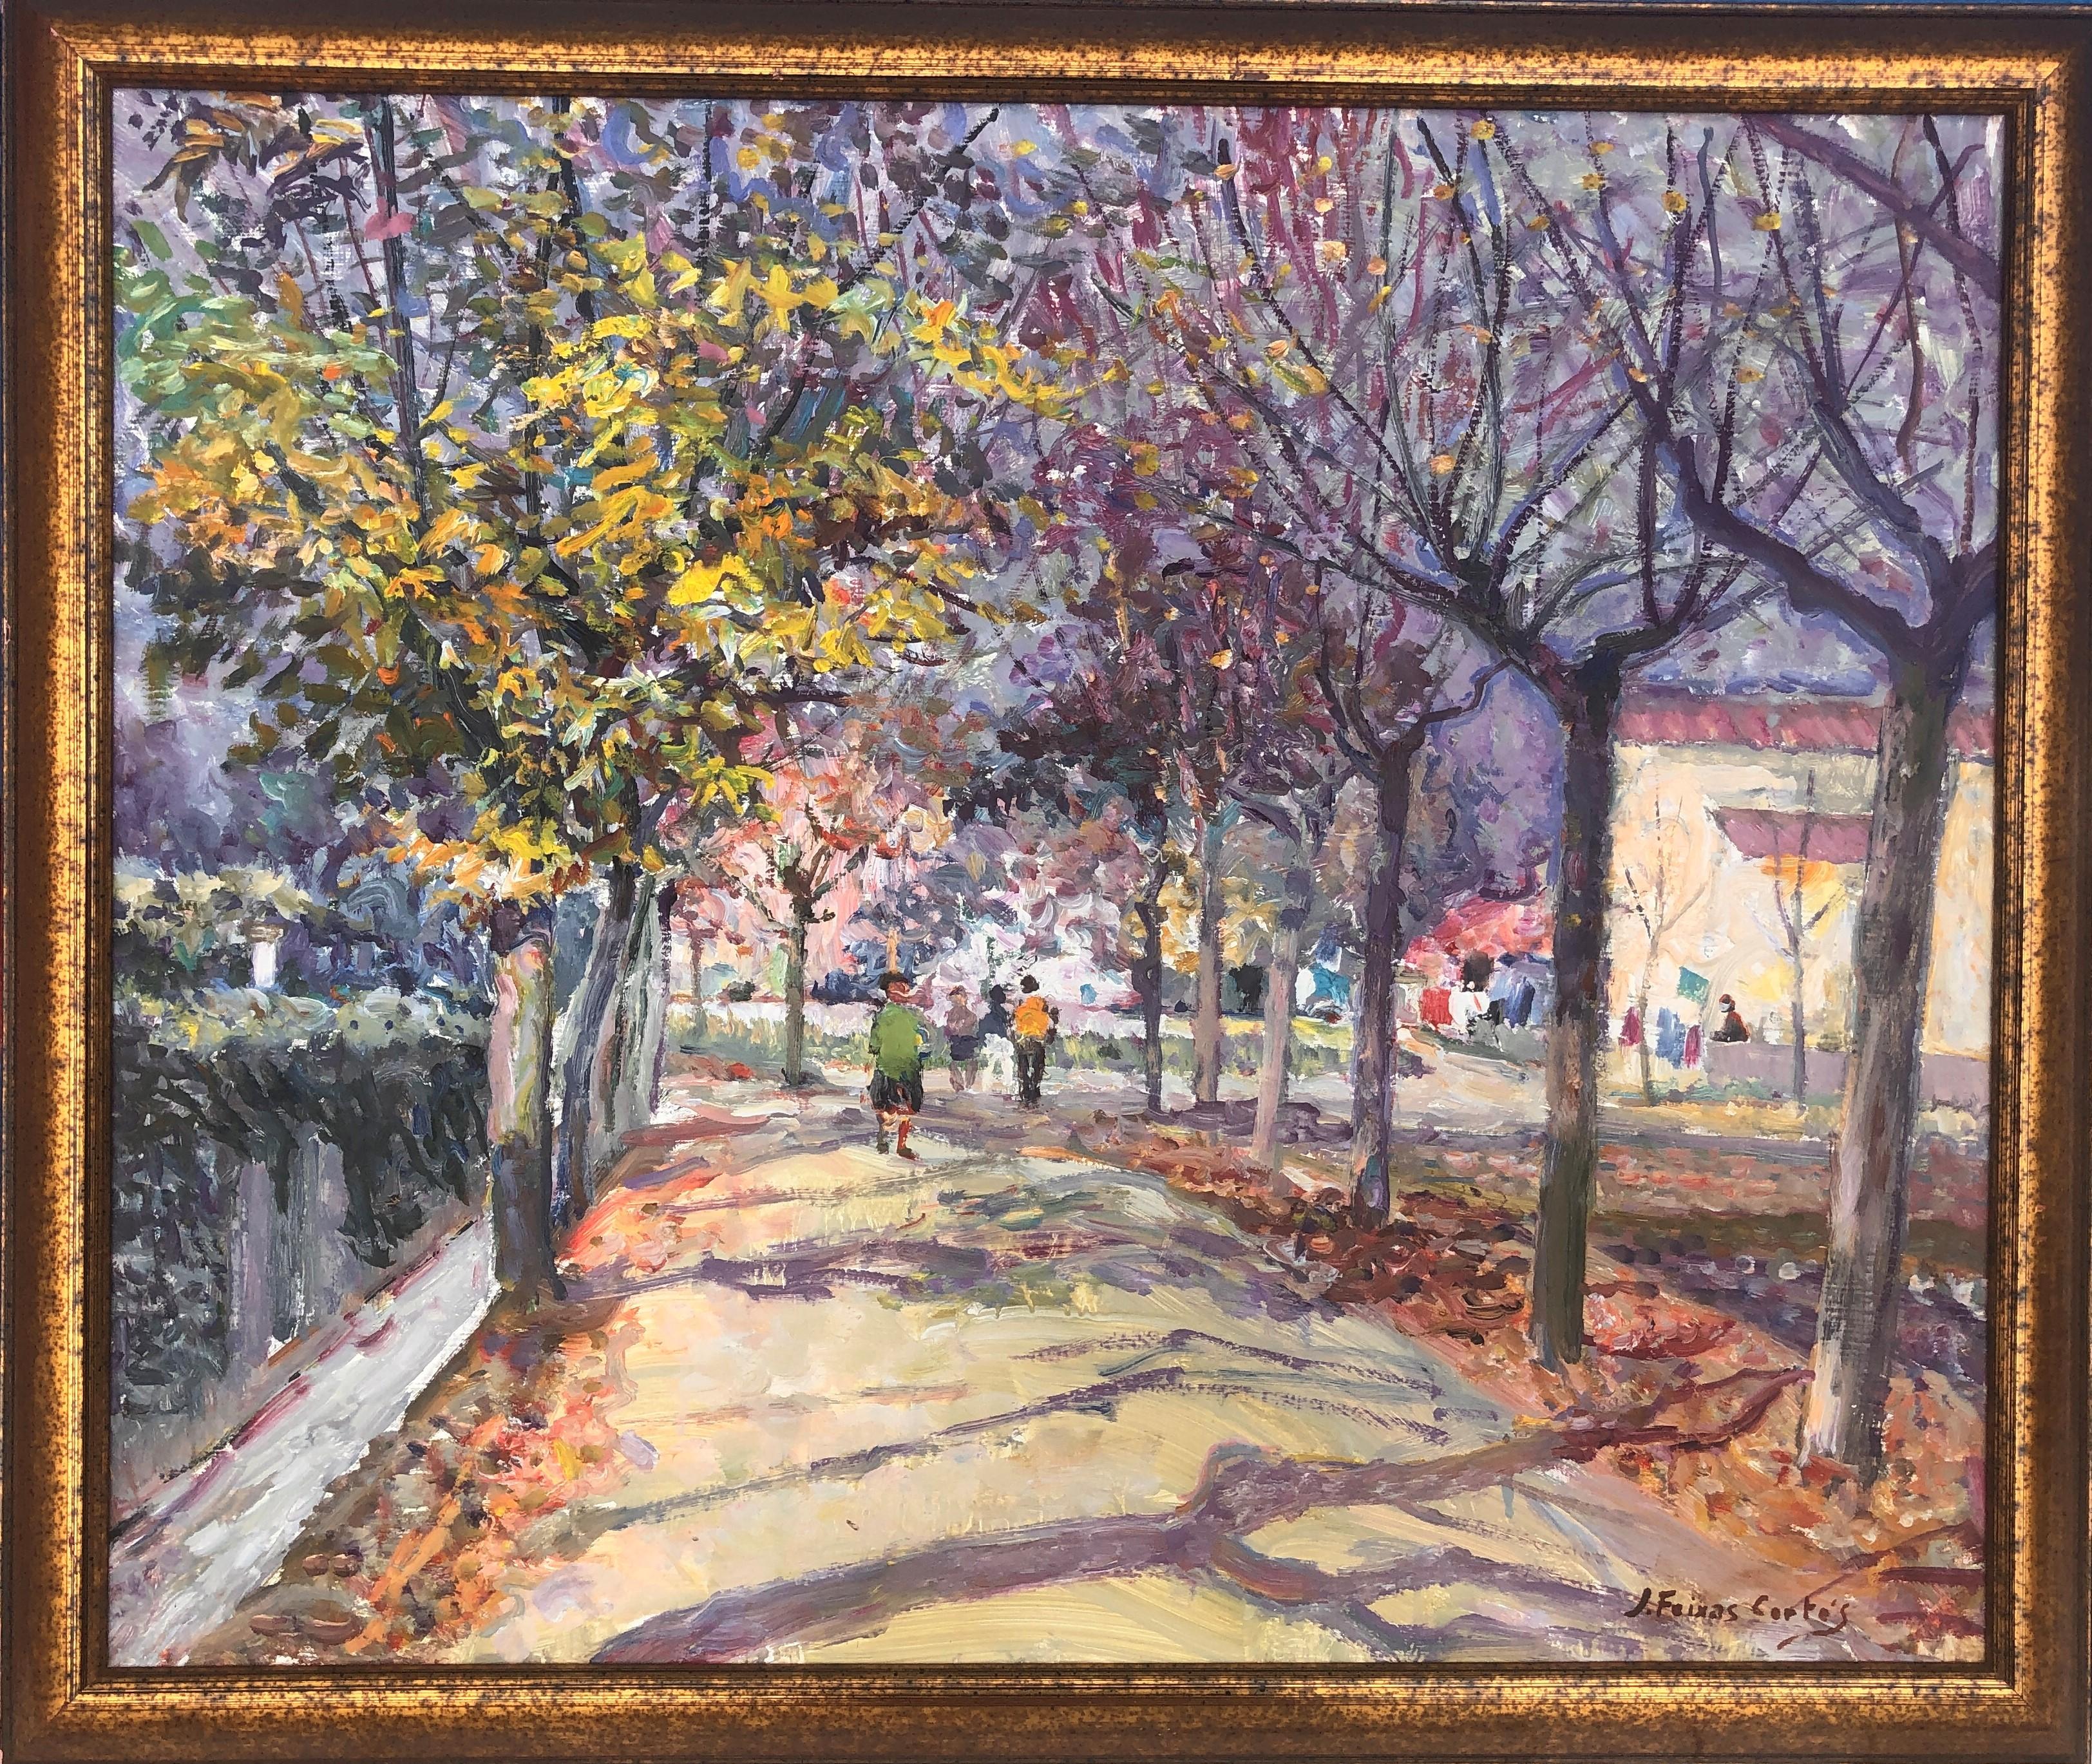 Walking in the park Spain oil on canvas painting - Painting by Jordi Freixas Cortes